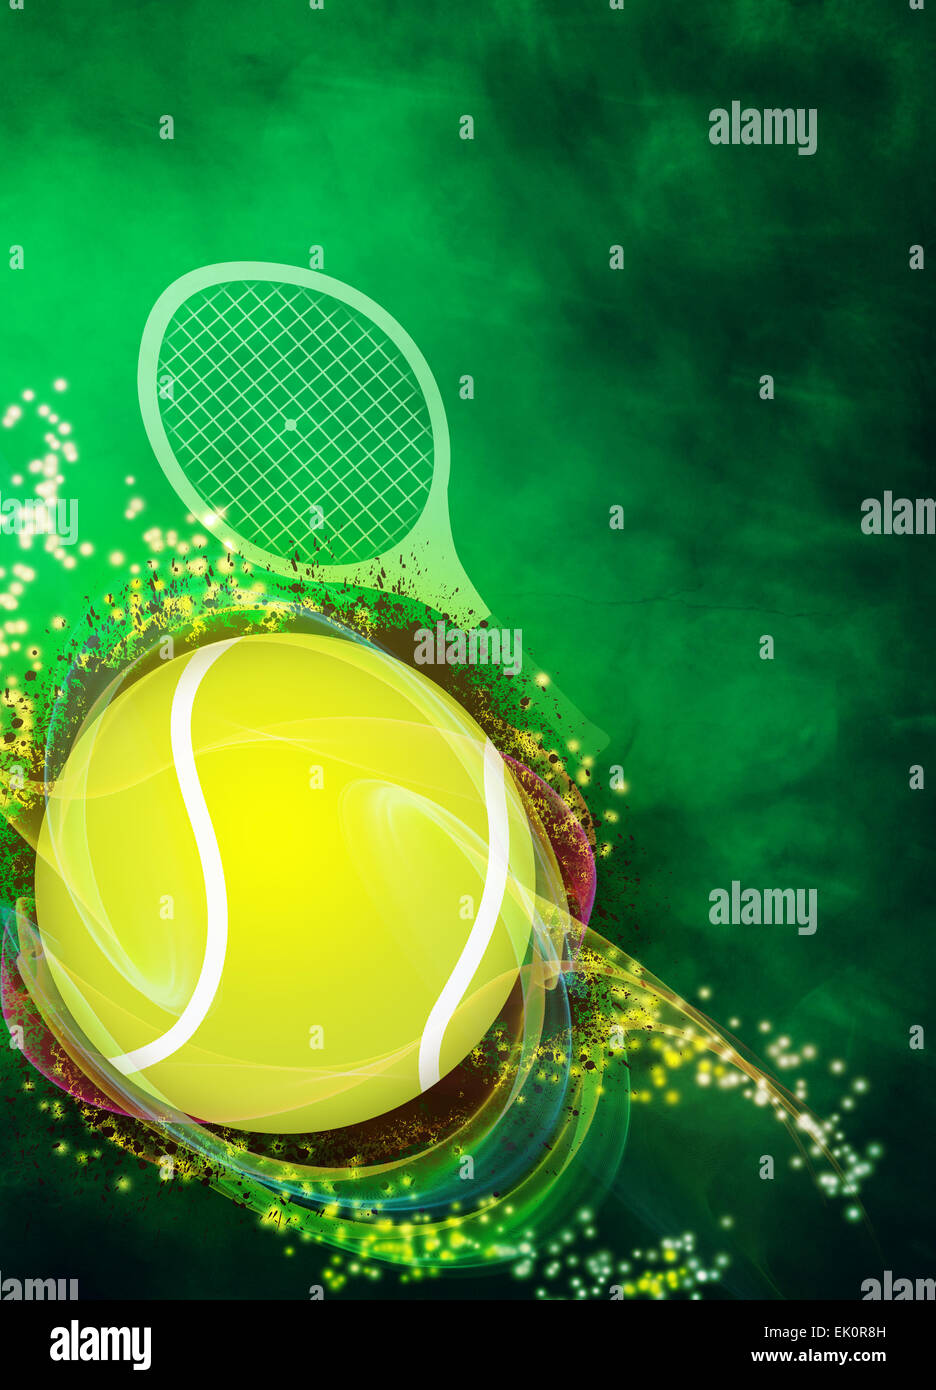 Abstract tennis invitation advert background with empty space Stock Photo -  Alamy